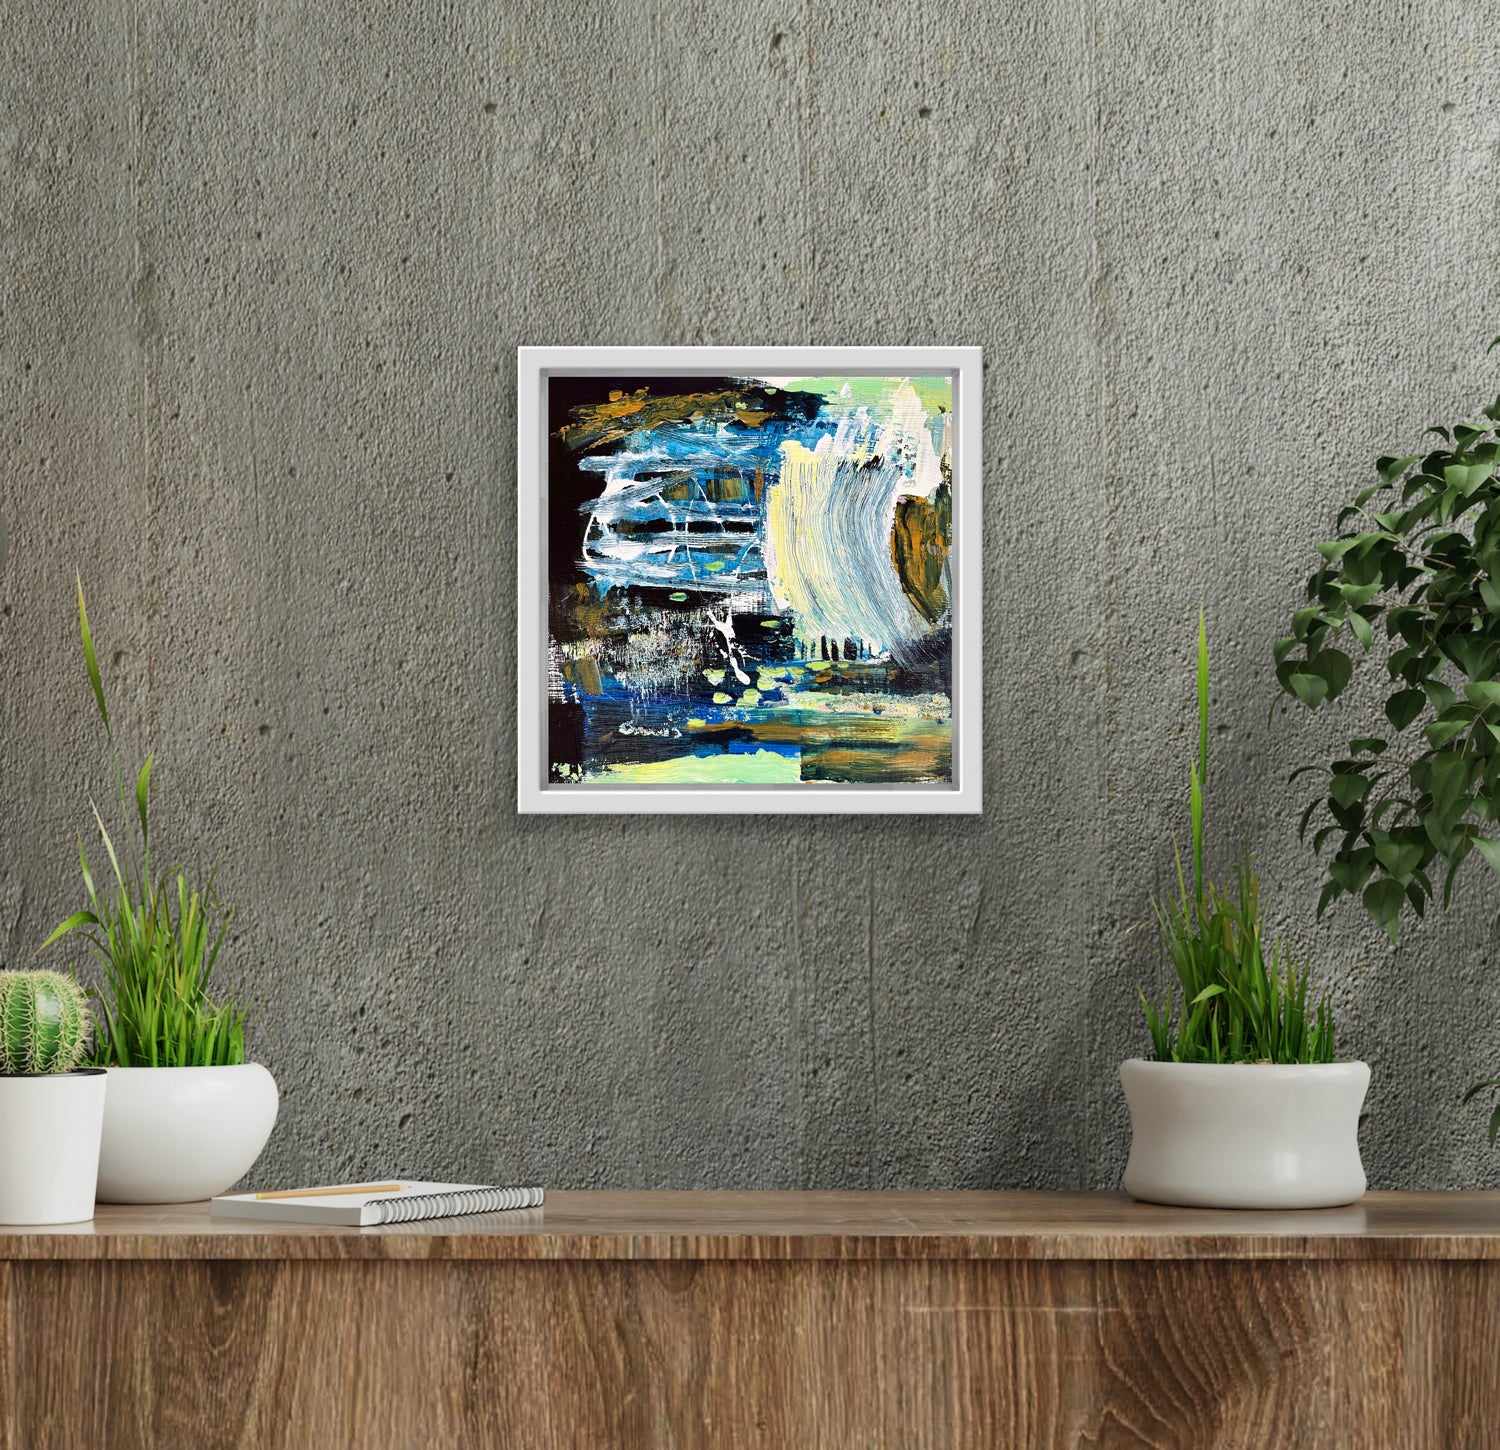 An abstract landscape painting of a river sits in a white frame in an elegant setting. It hangs on a grey textured concrete wall surrounded by green plants in white containers. There is a textured wooden sideboard underneath and the edge of a ficus is visible to the right.